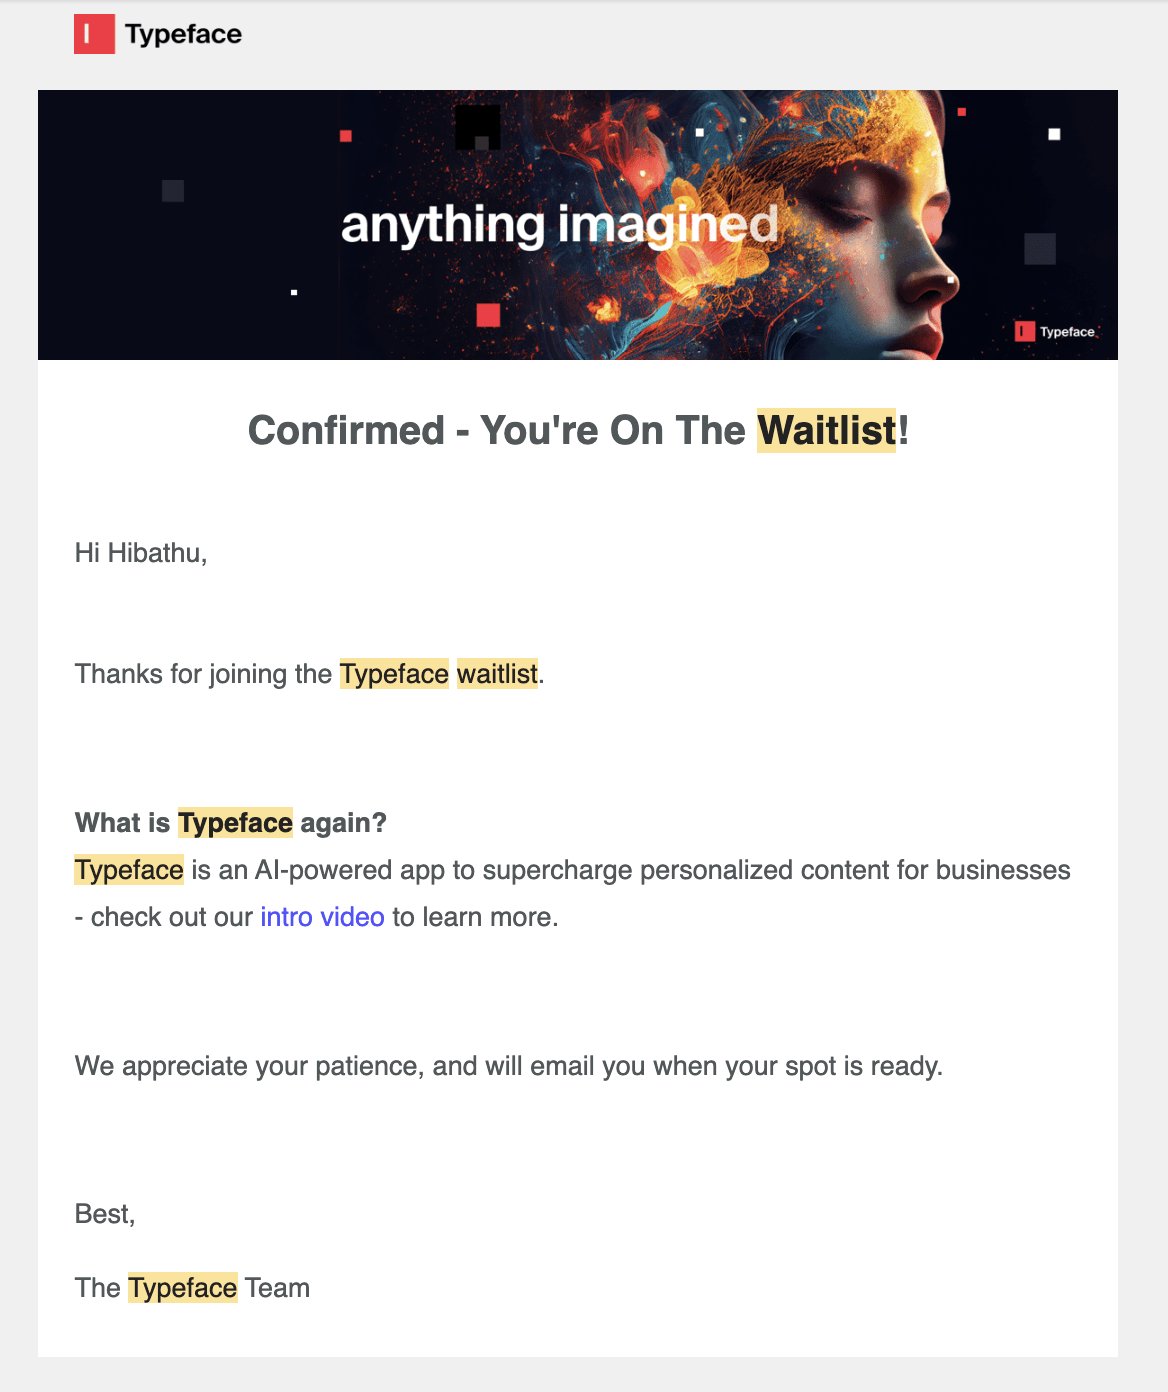 SaaS Waitlist Emails: Screenshot of Typeface's email confirming that the user is on the waitlist